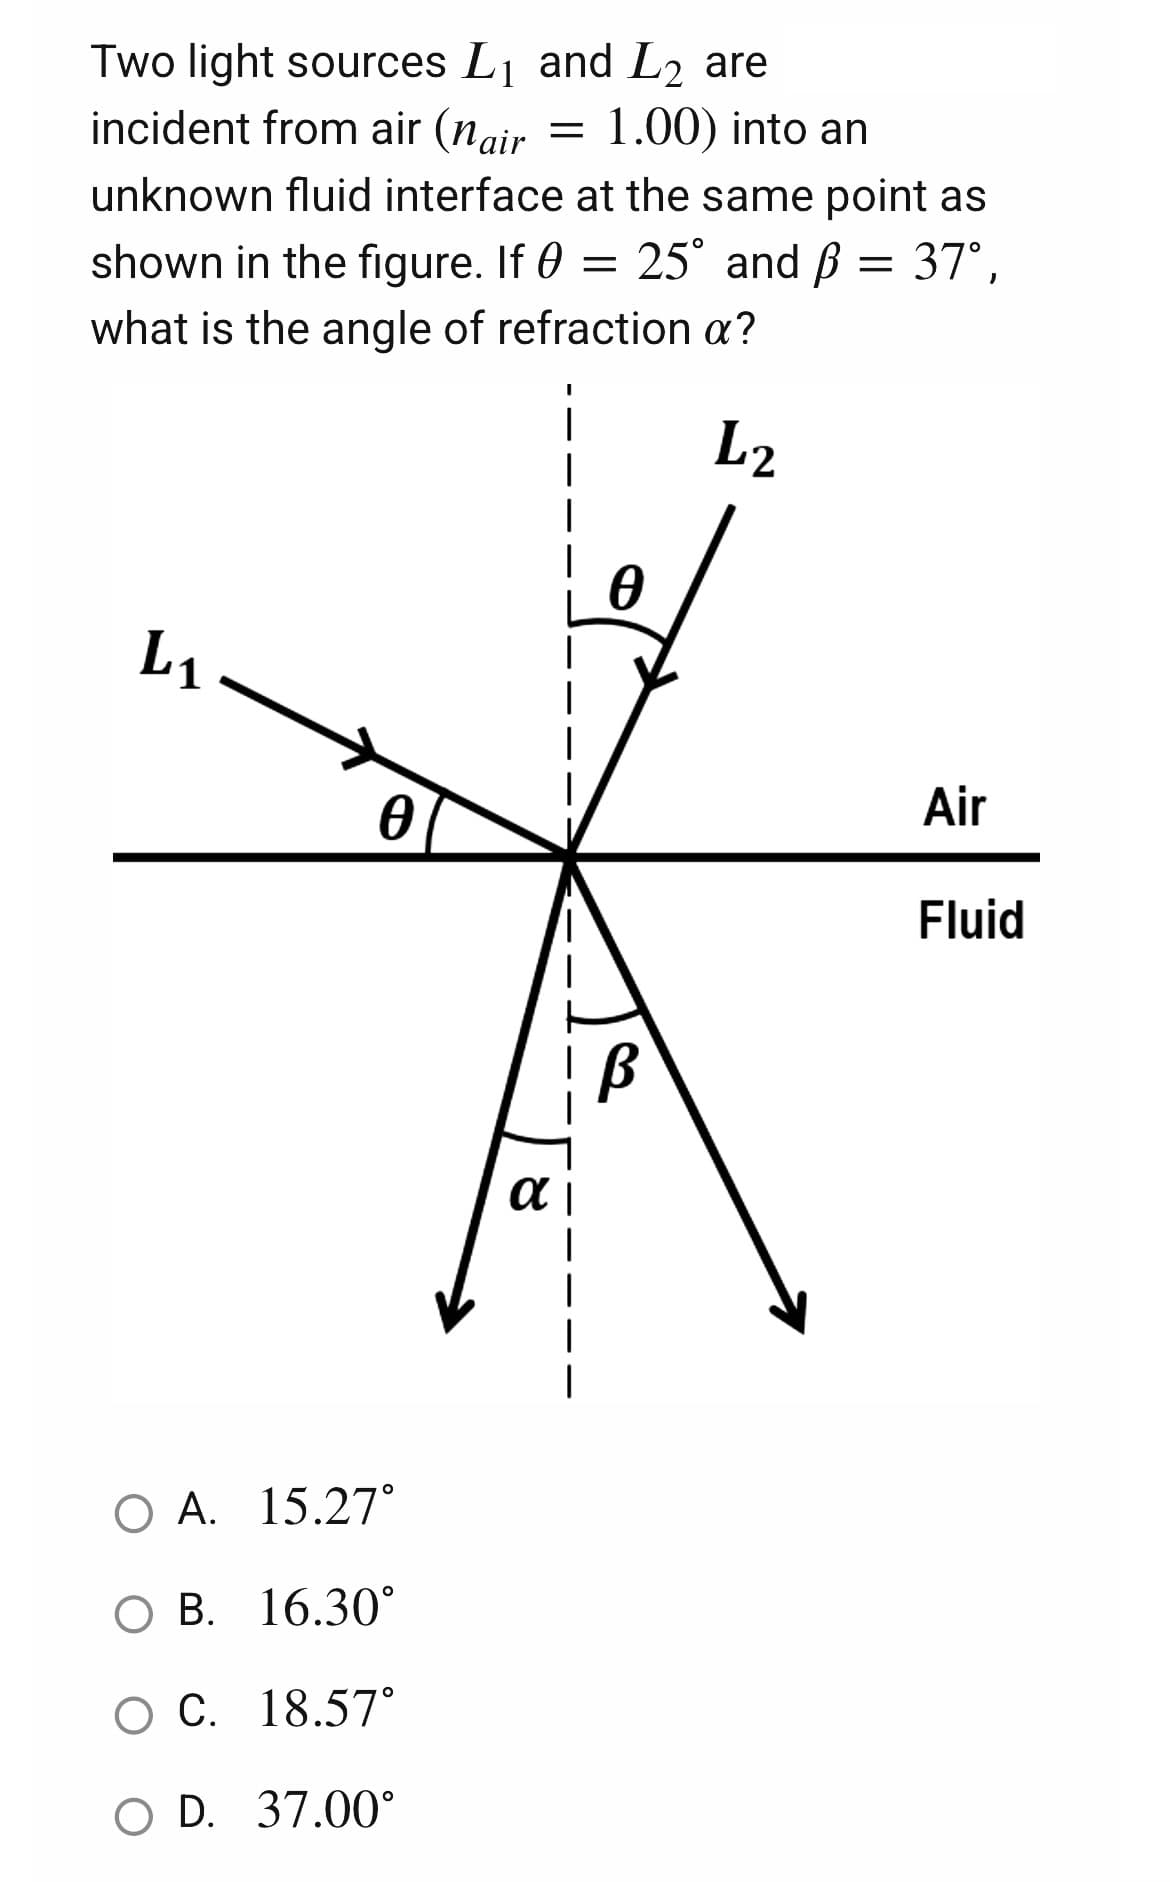 Two light sources L₁ and L₂ are
1 L2
=
1.00) into an
incident from air (nair
unknown fluid interface at the same point as
shown in the figure. If 0 = 25° and ß = 37°,
what is the angle of refraction a?
I
L2
L₁
1
αι
|
Ꮎ
O A.
15.27°
O B. 16.30°
O C. 18.57°
O D. 37.00°
Air
Fluid